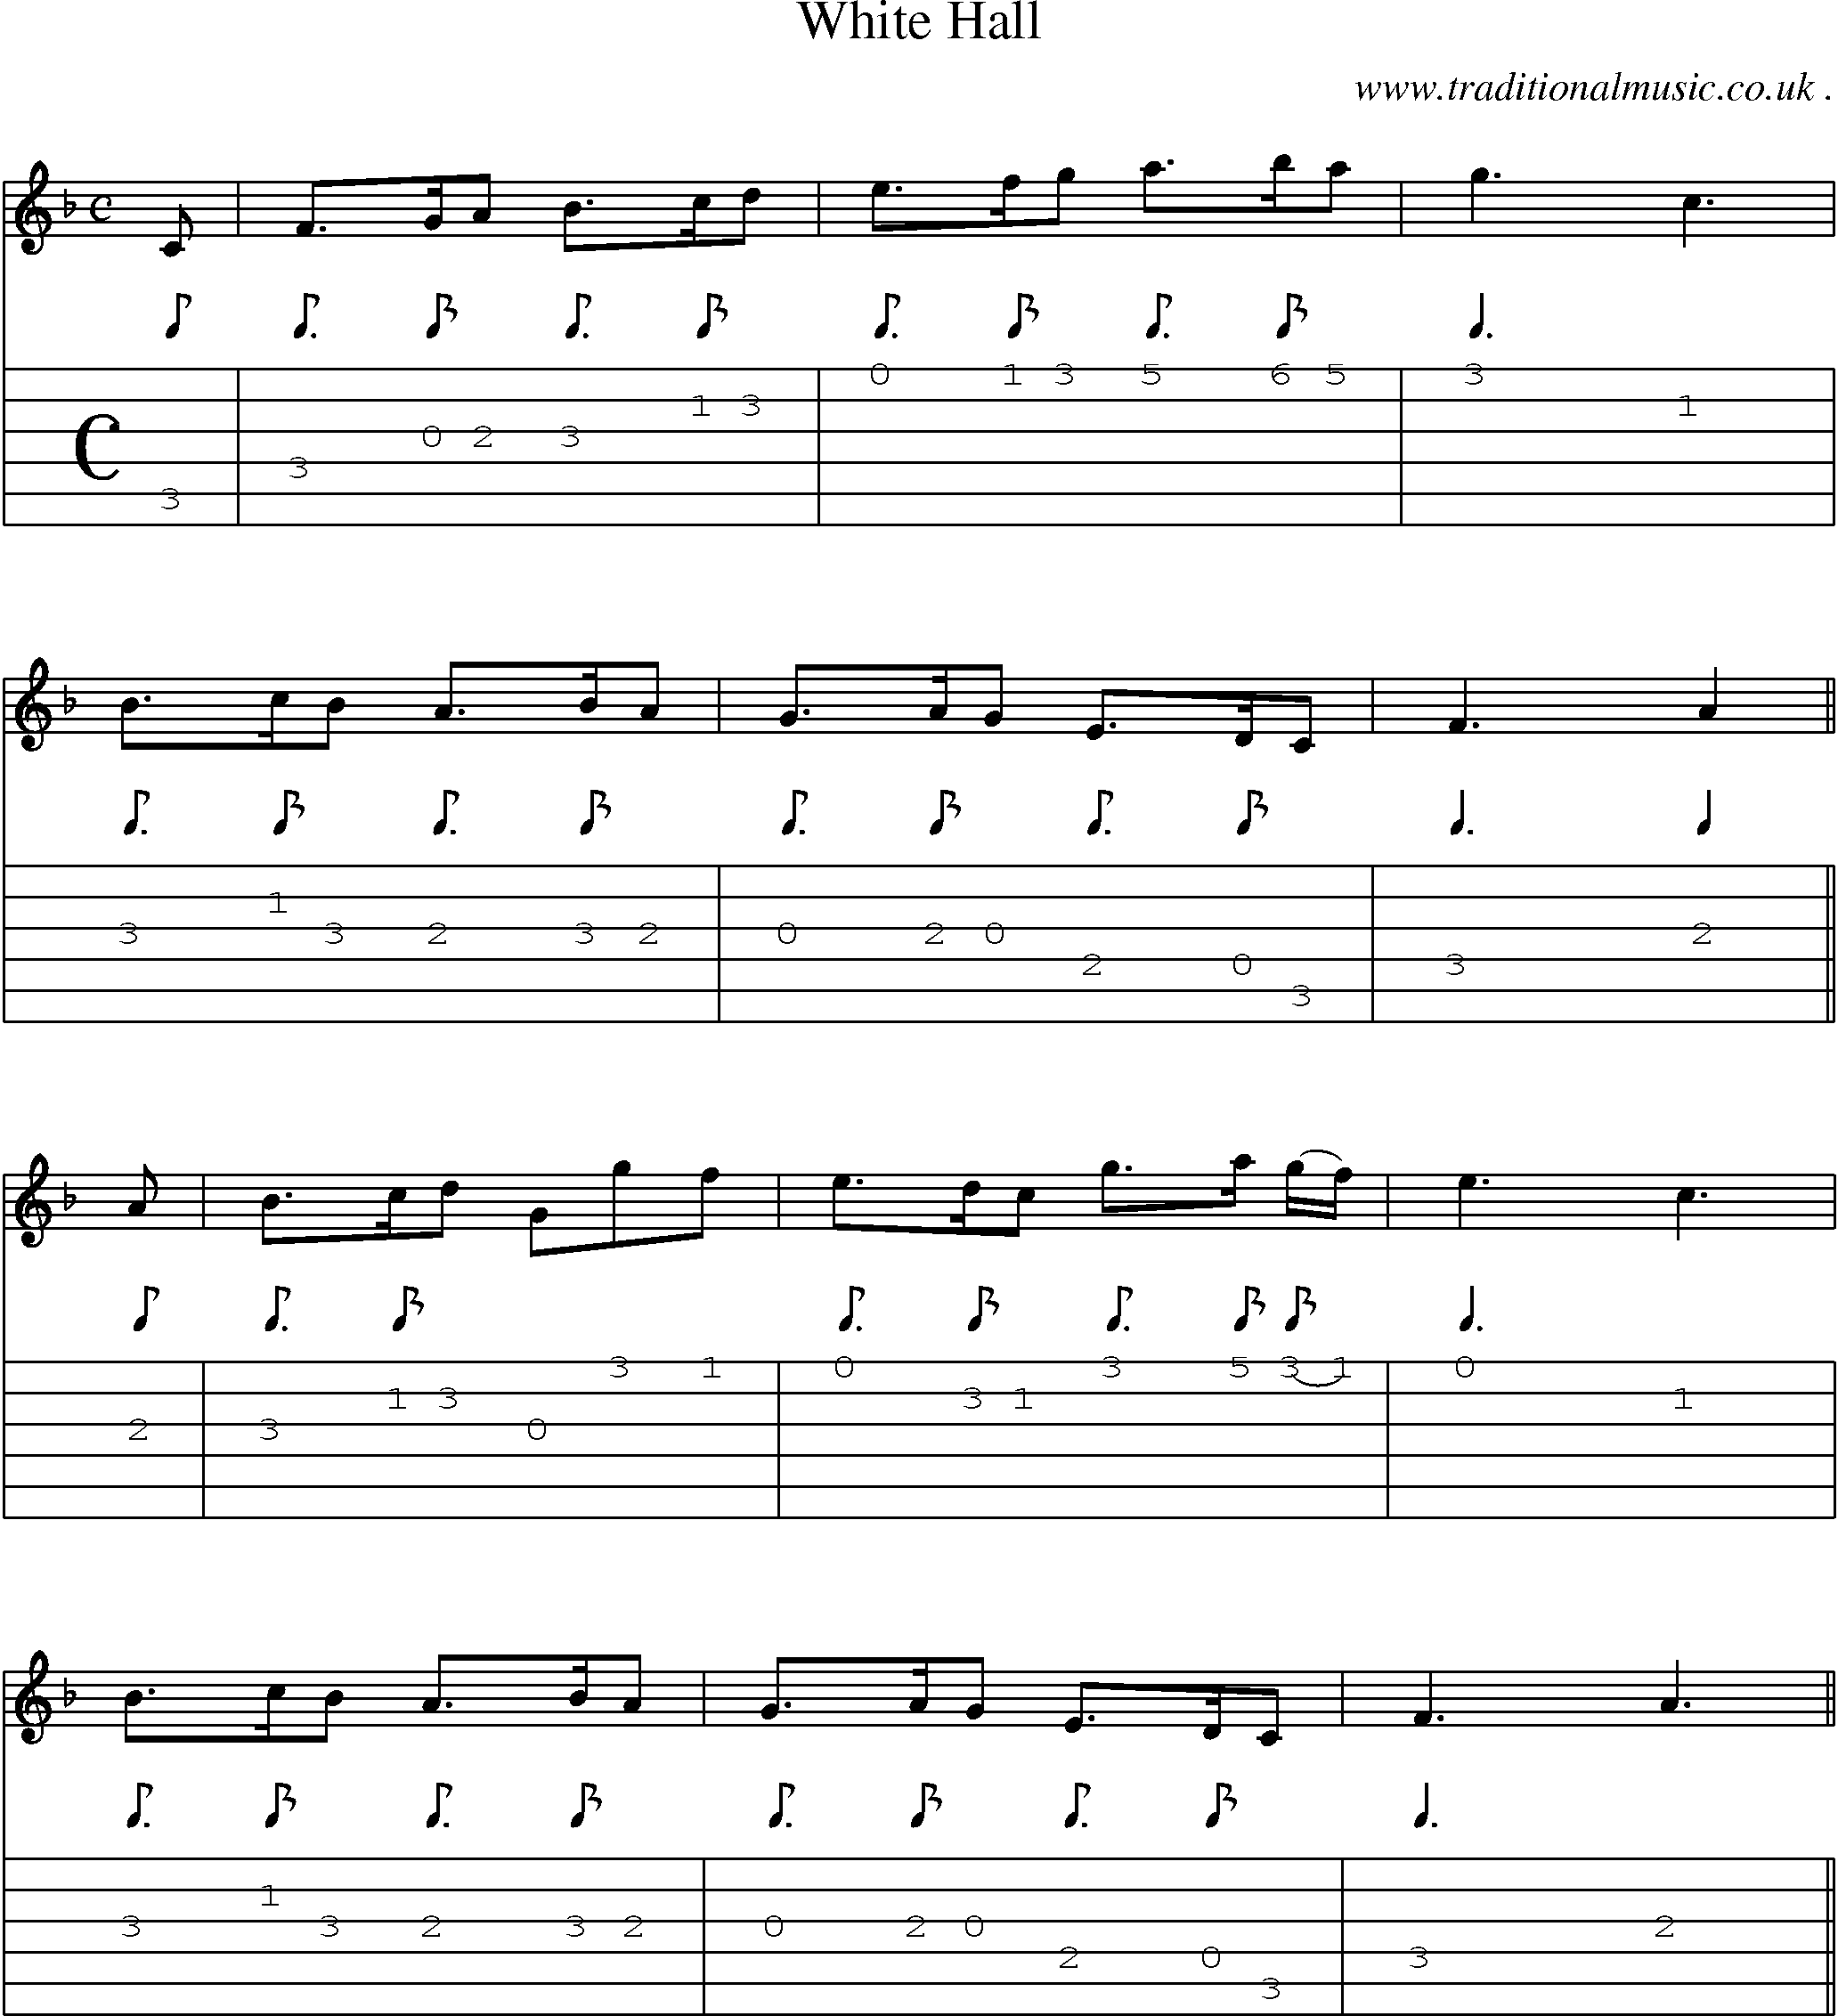 Sheet-Music and Guitar Tabs for White Hall